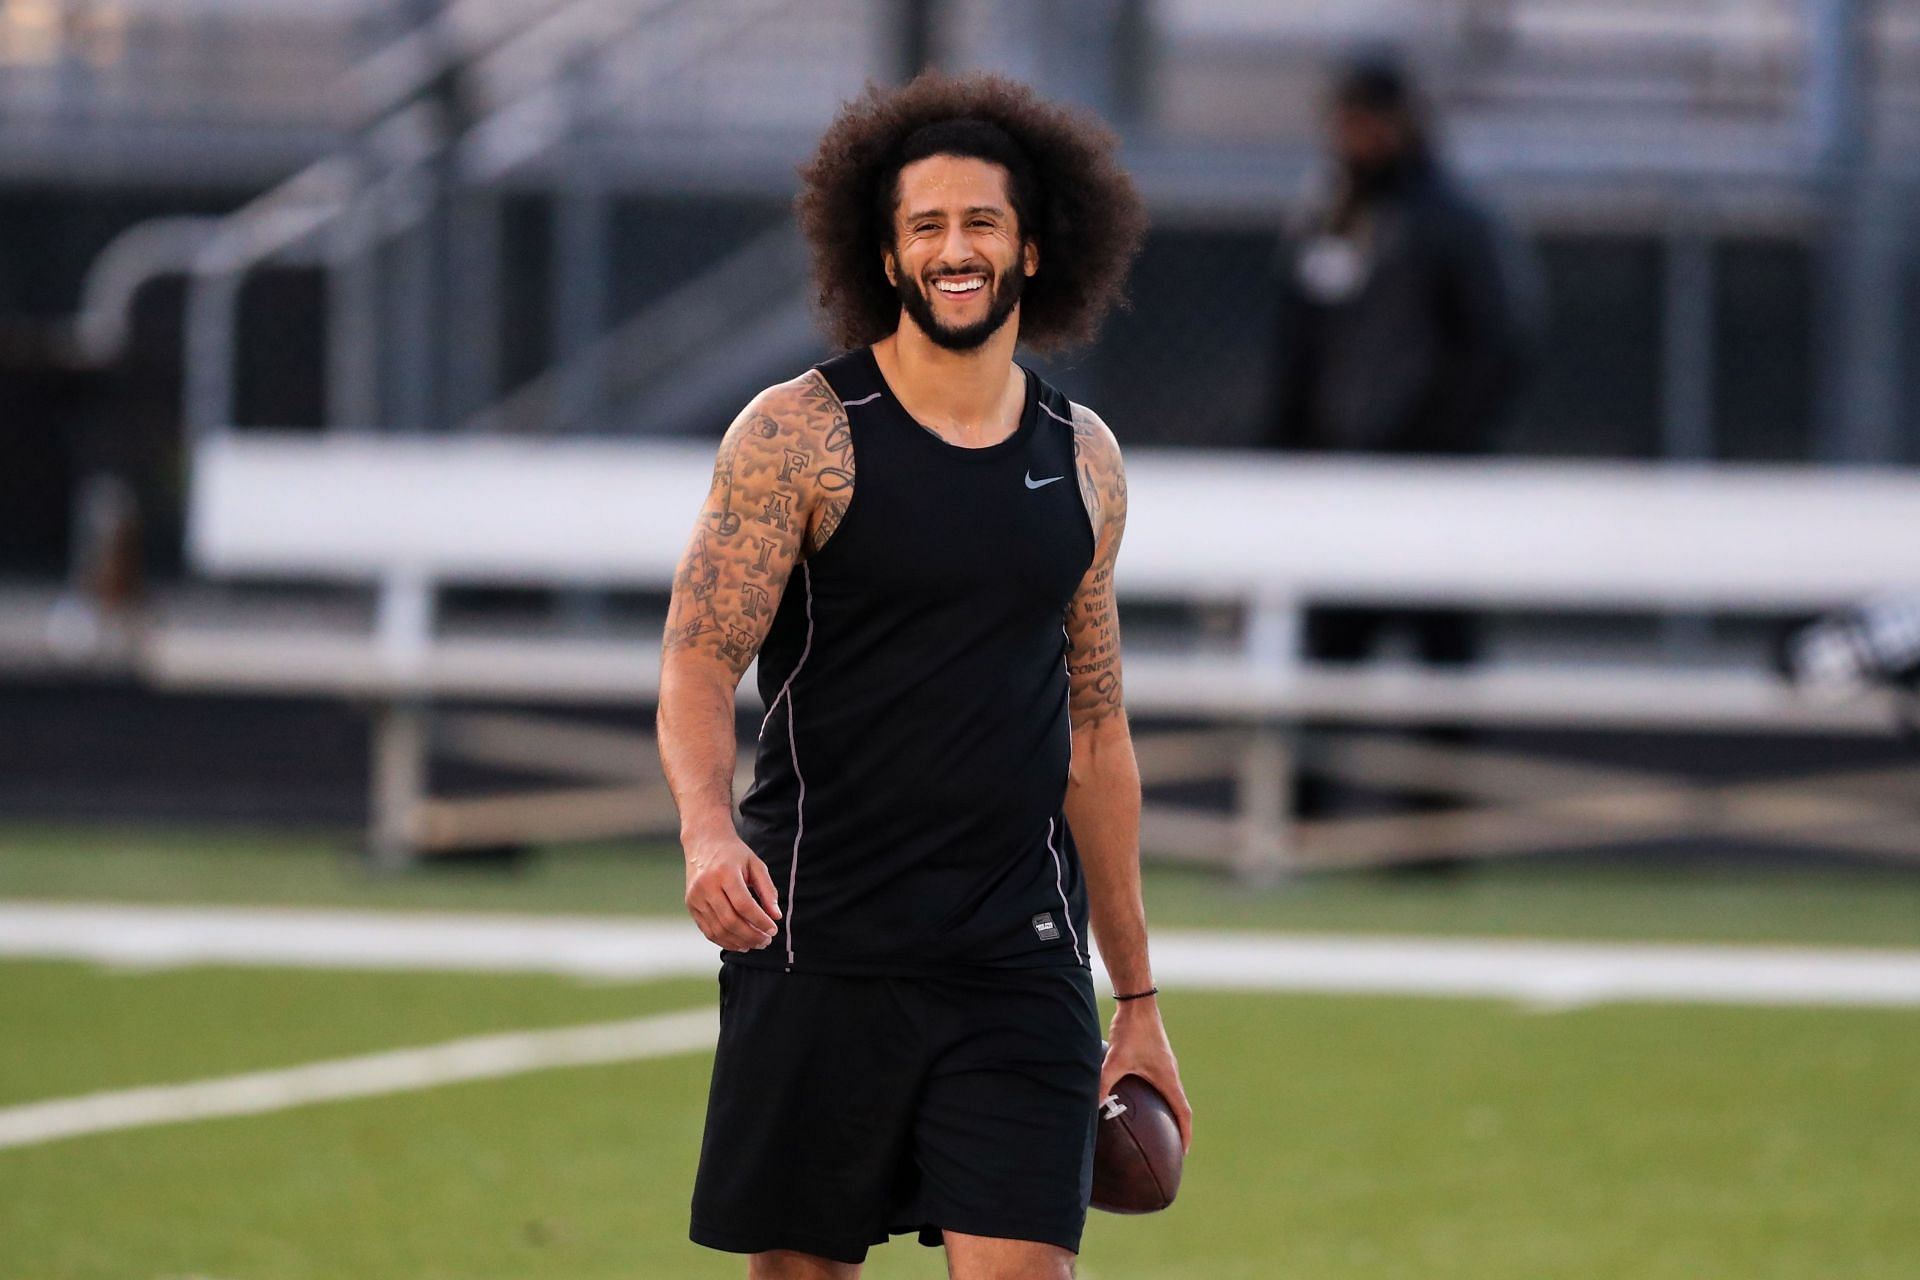 Colin Kaepernick has been working out privatley more often this offseason with hopes to return to NFL